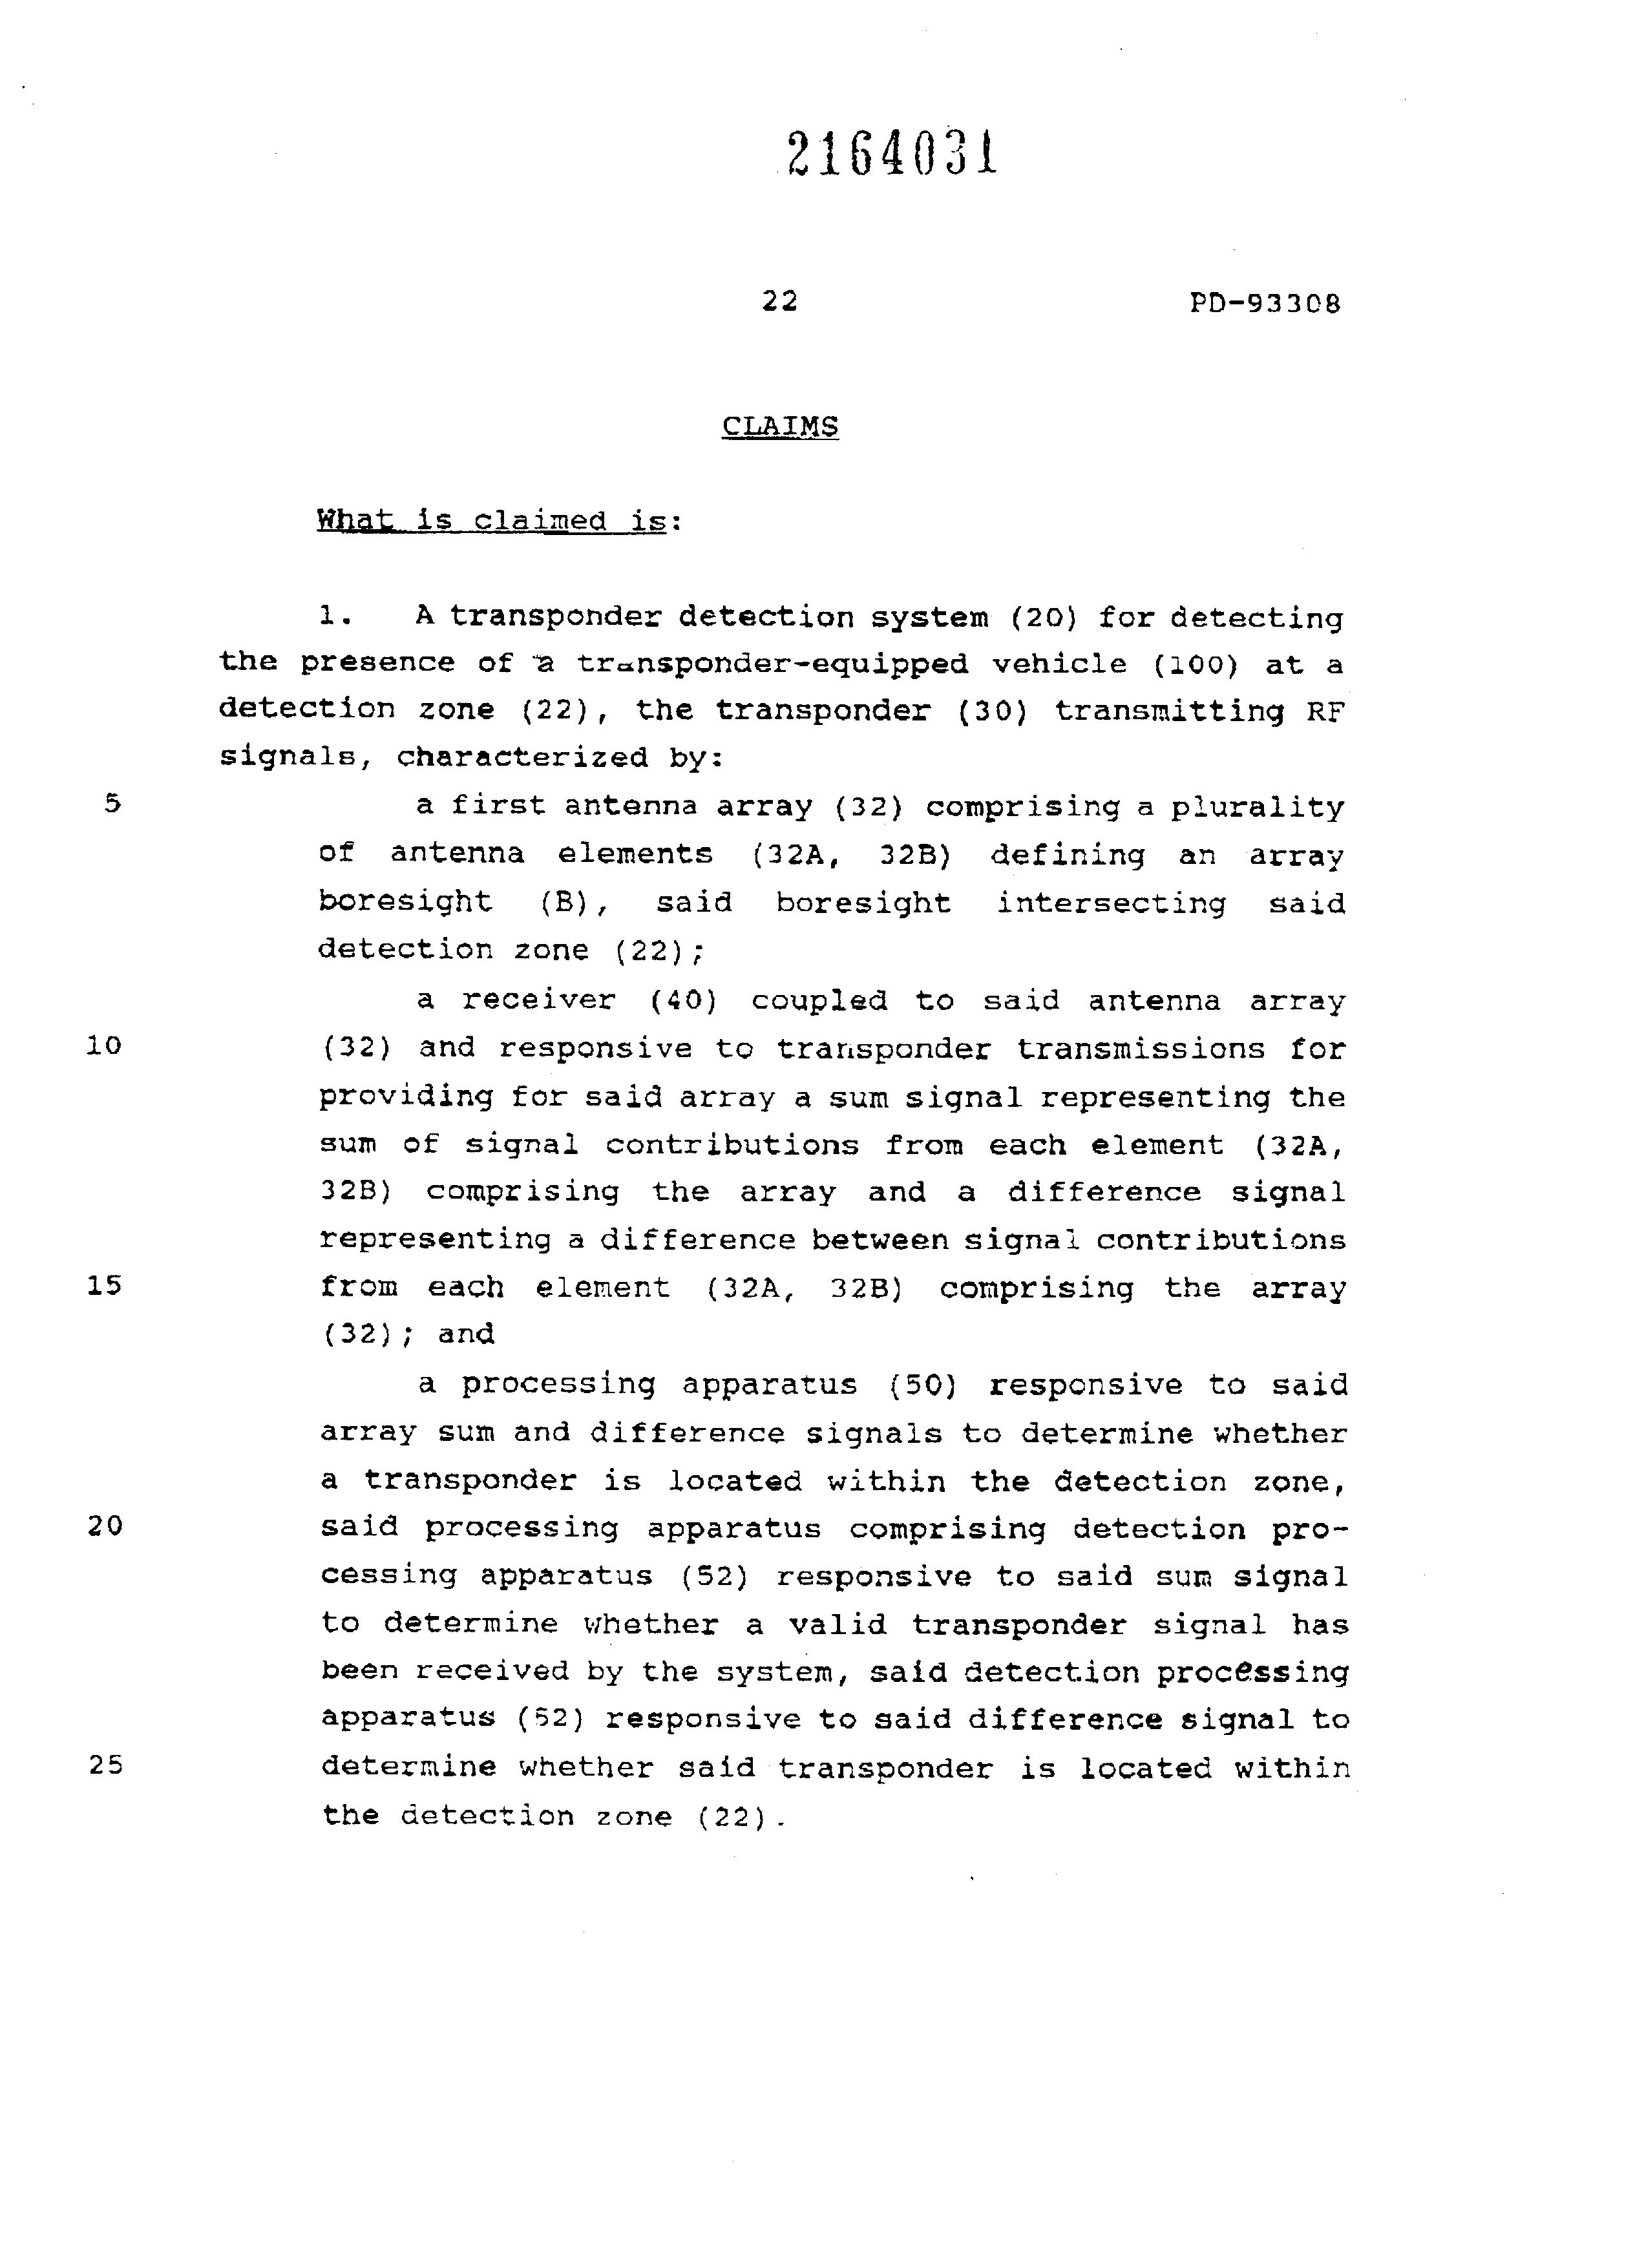 Canadian Patent Document 2164031. Claims 19960424. Image 1 of 3